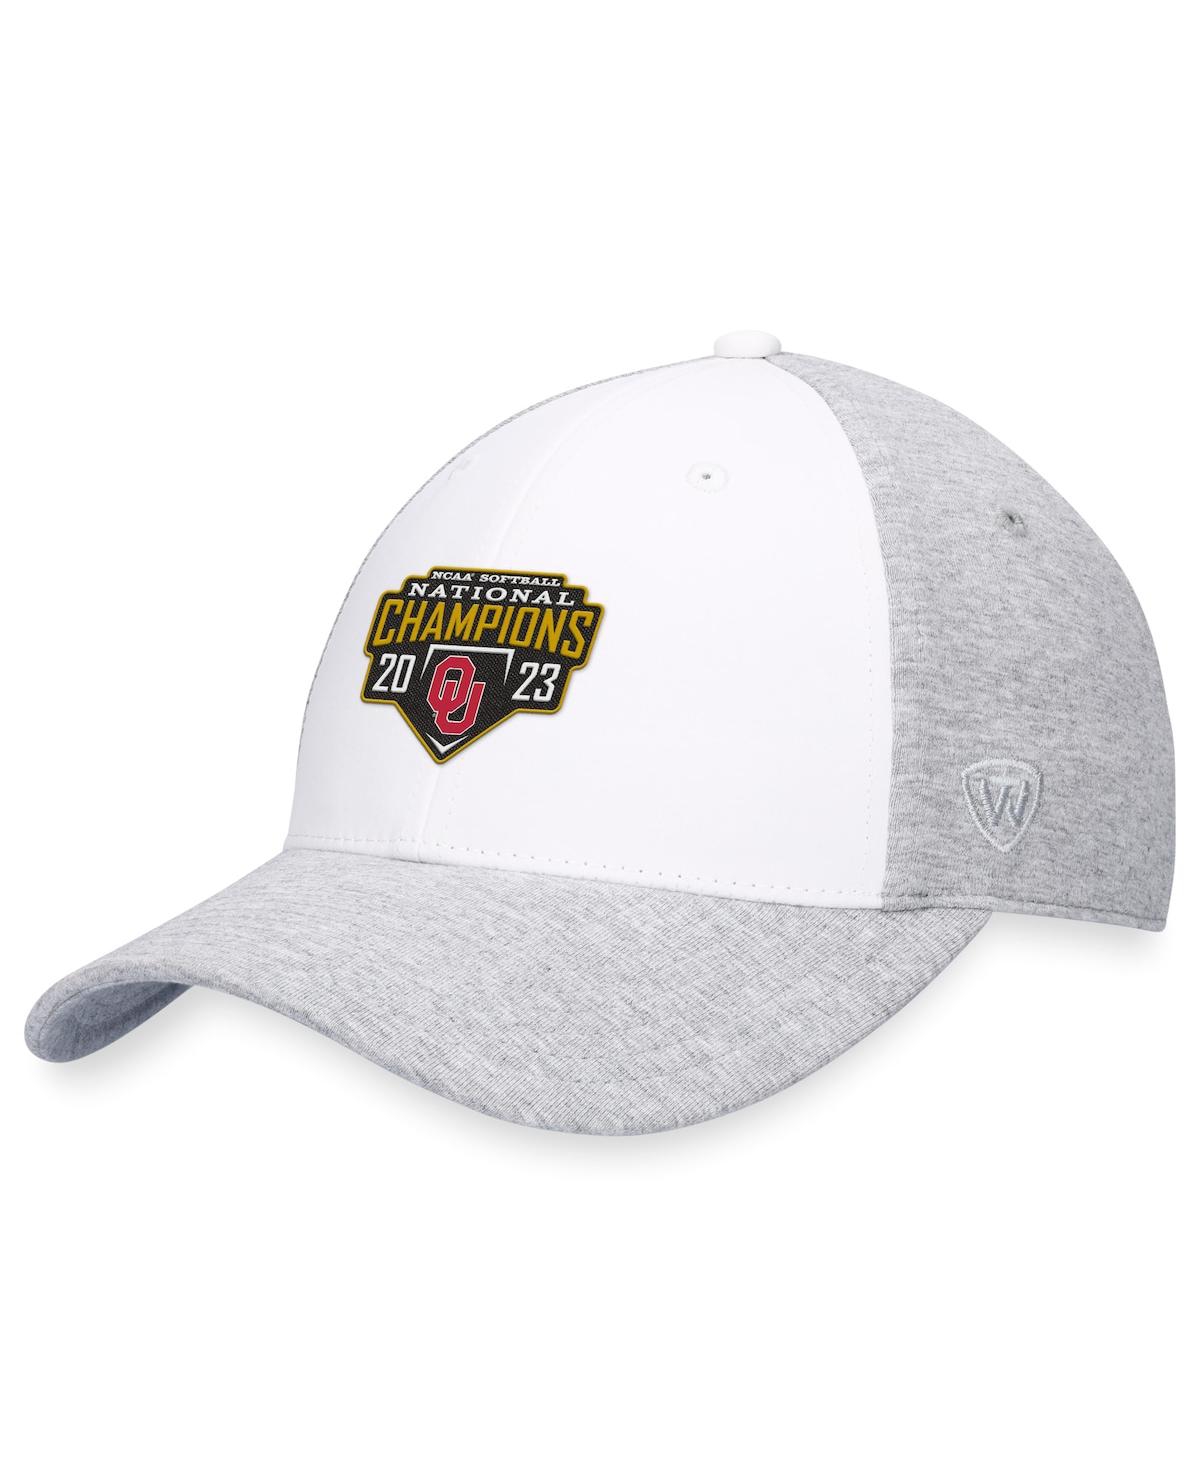 Men's and Women's Top of the World White Oklahoma Sooners 2023 Ncaa Softball Women's College World Series Champions Adjustable Hat - White